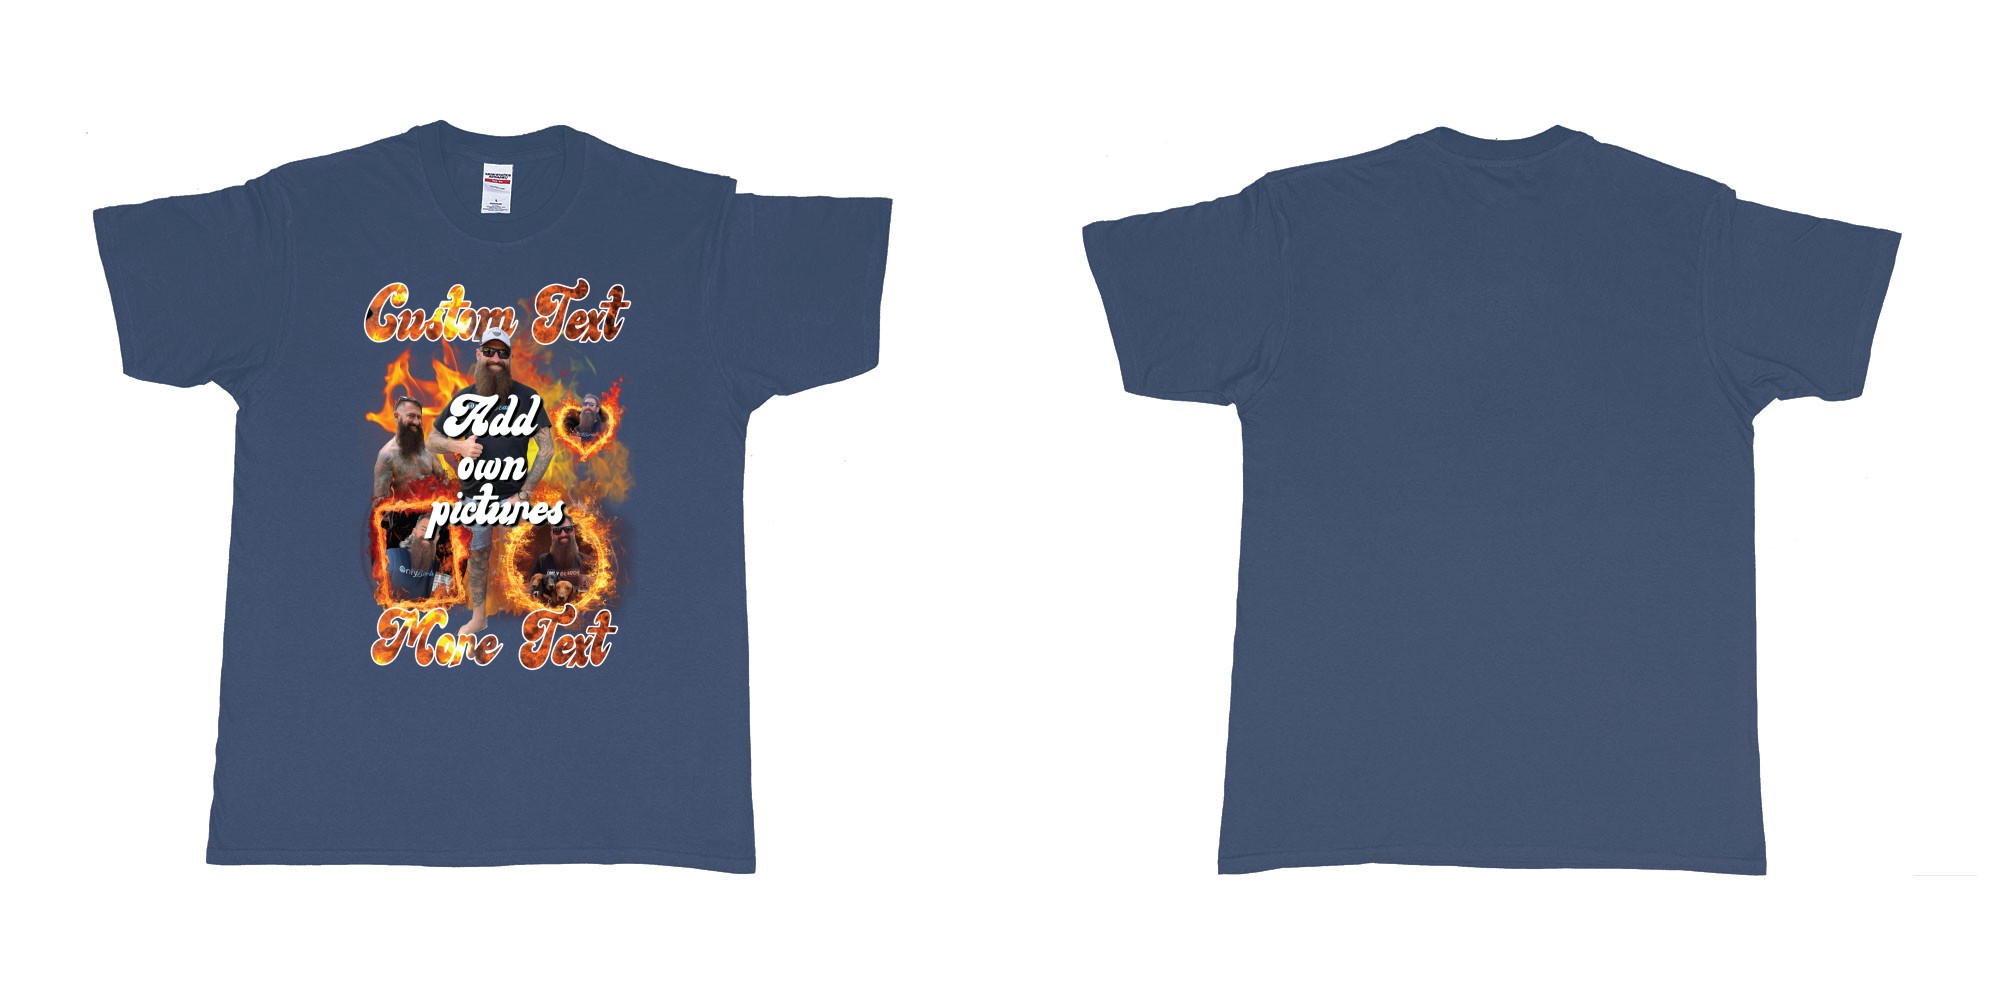 Custom tshirt design fire frames own custom pictures and text in fabric color navy choice your own text made in Bali by The Pirate Way